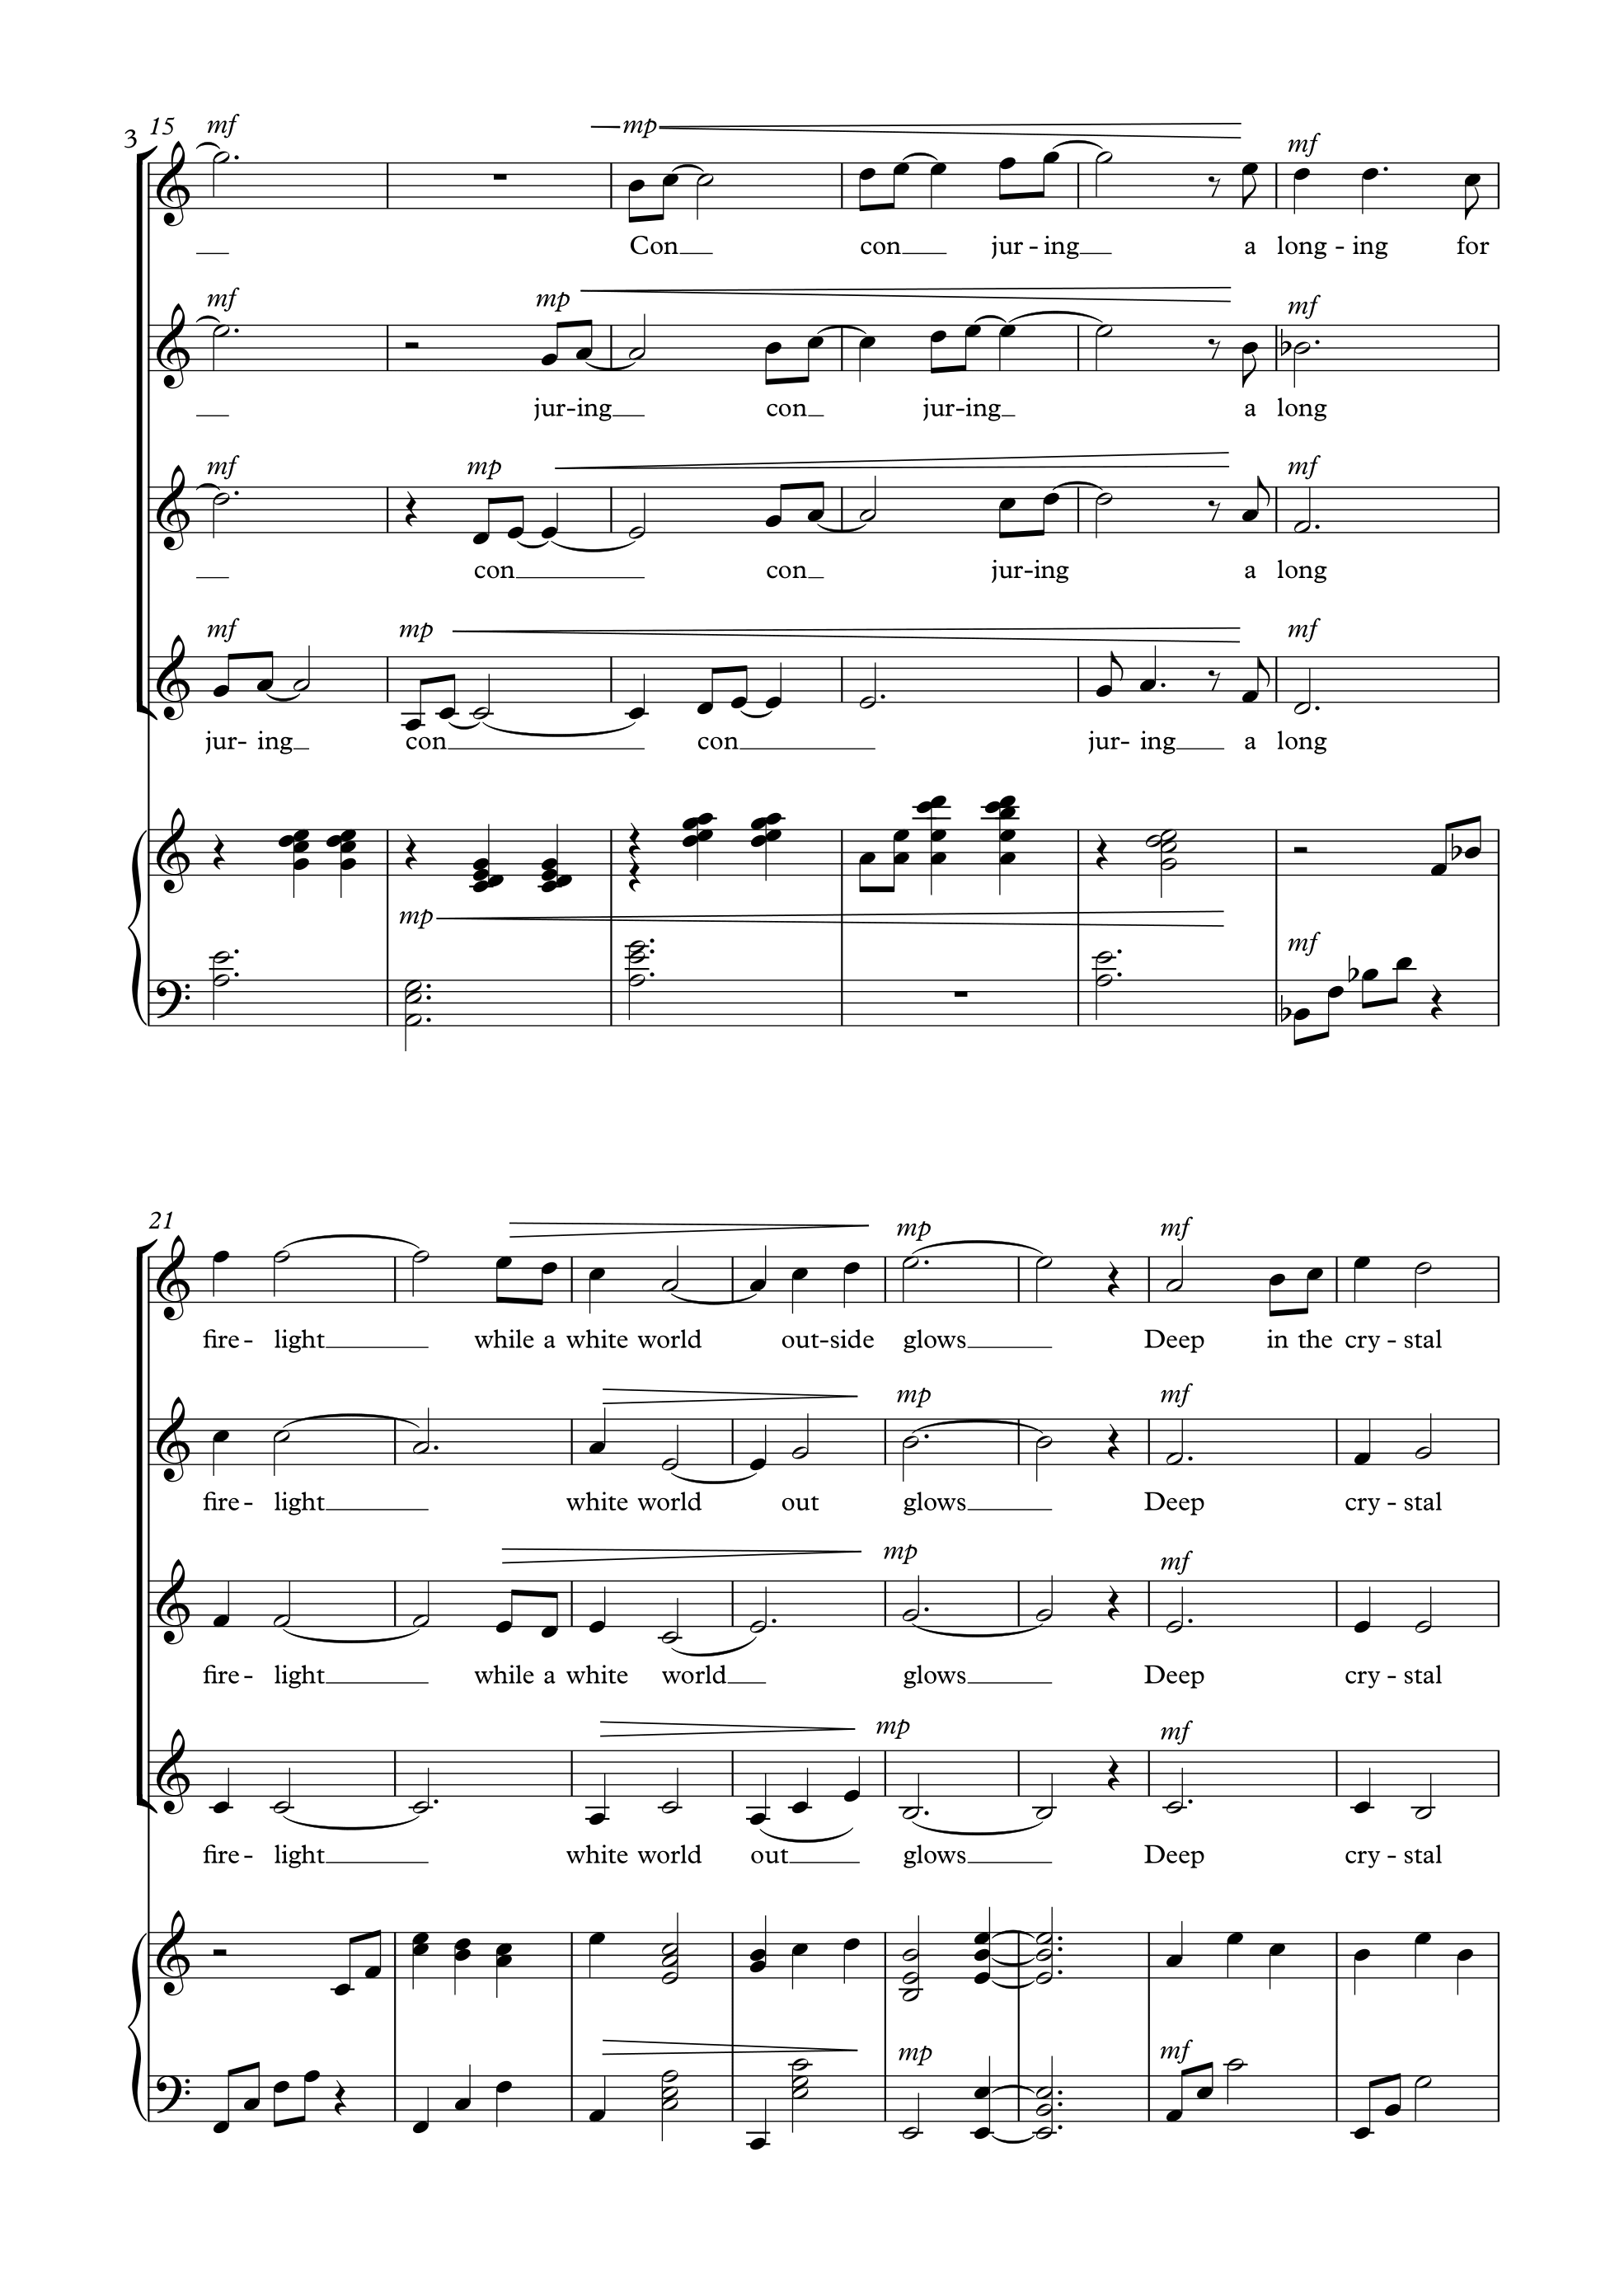 201902_A Promise of Spring Full Score-4.png